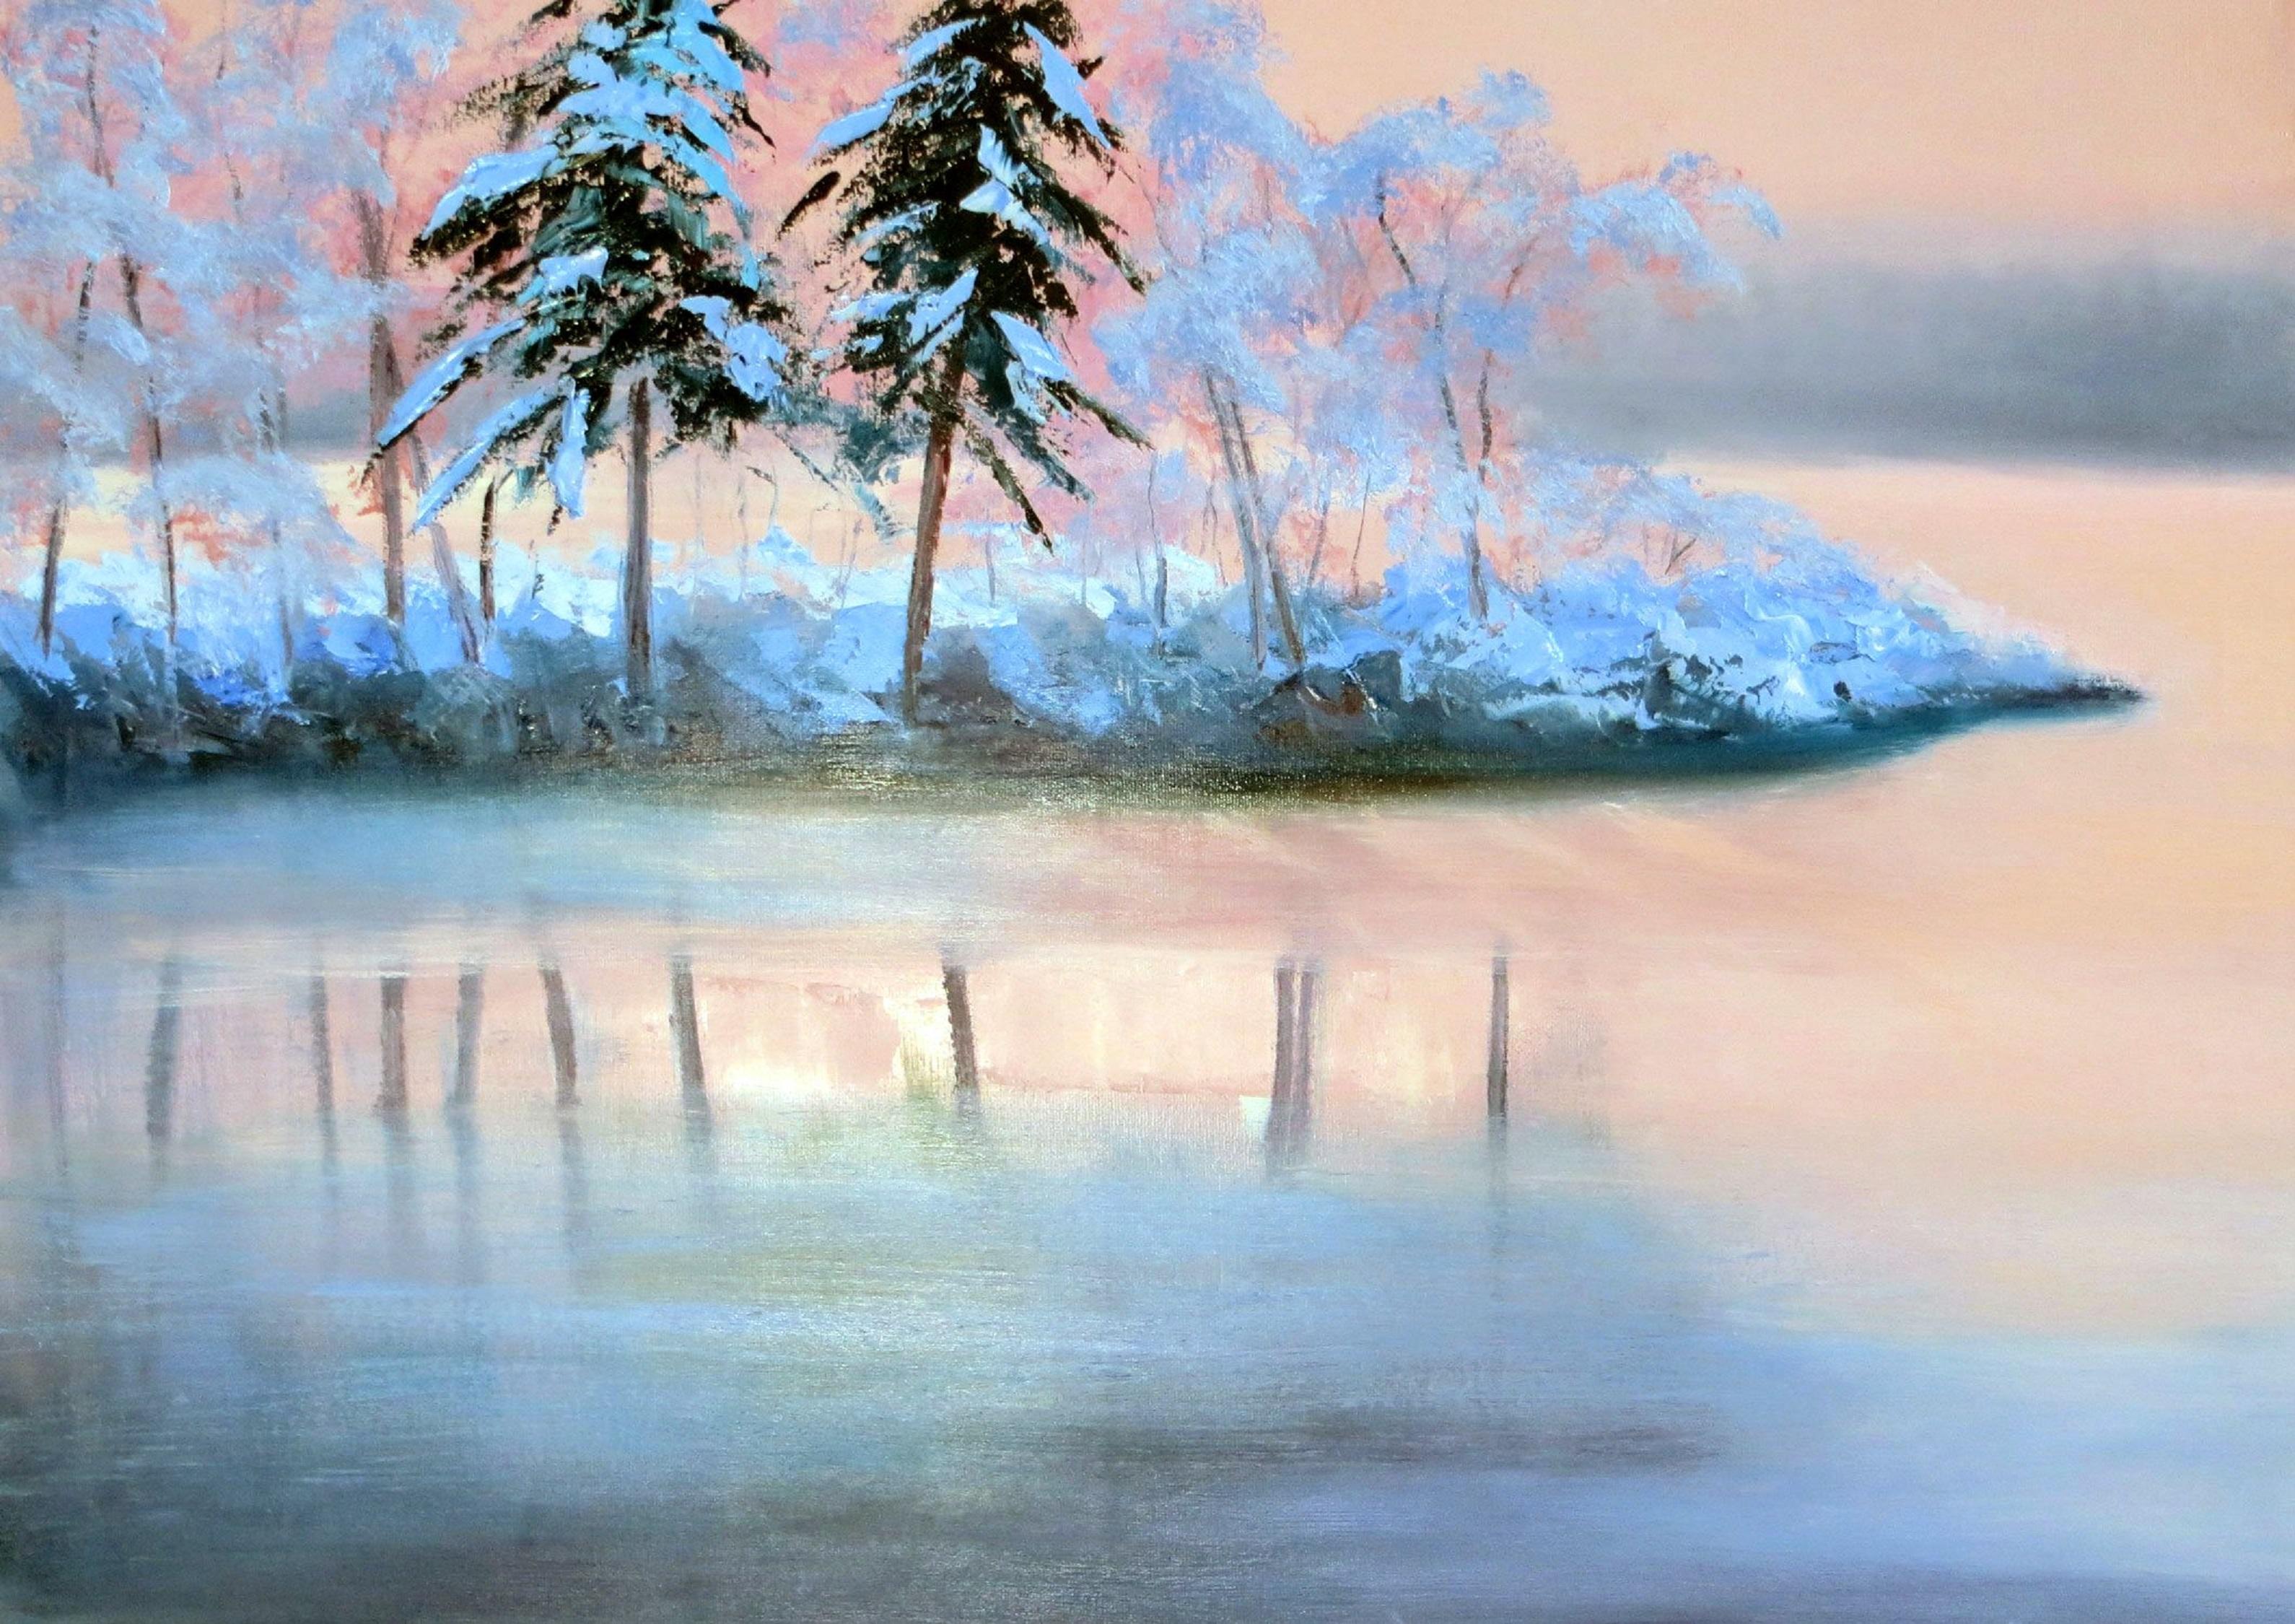 Elena Lukina Landscape Painting - WINTER SALE! The river in winter 50X70 oil painting